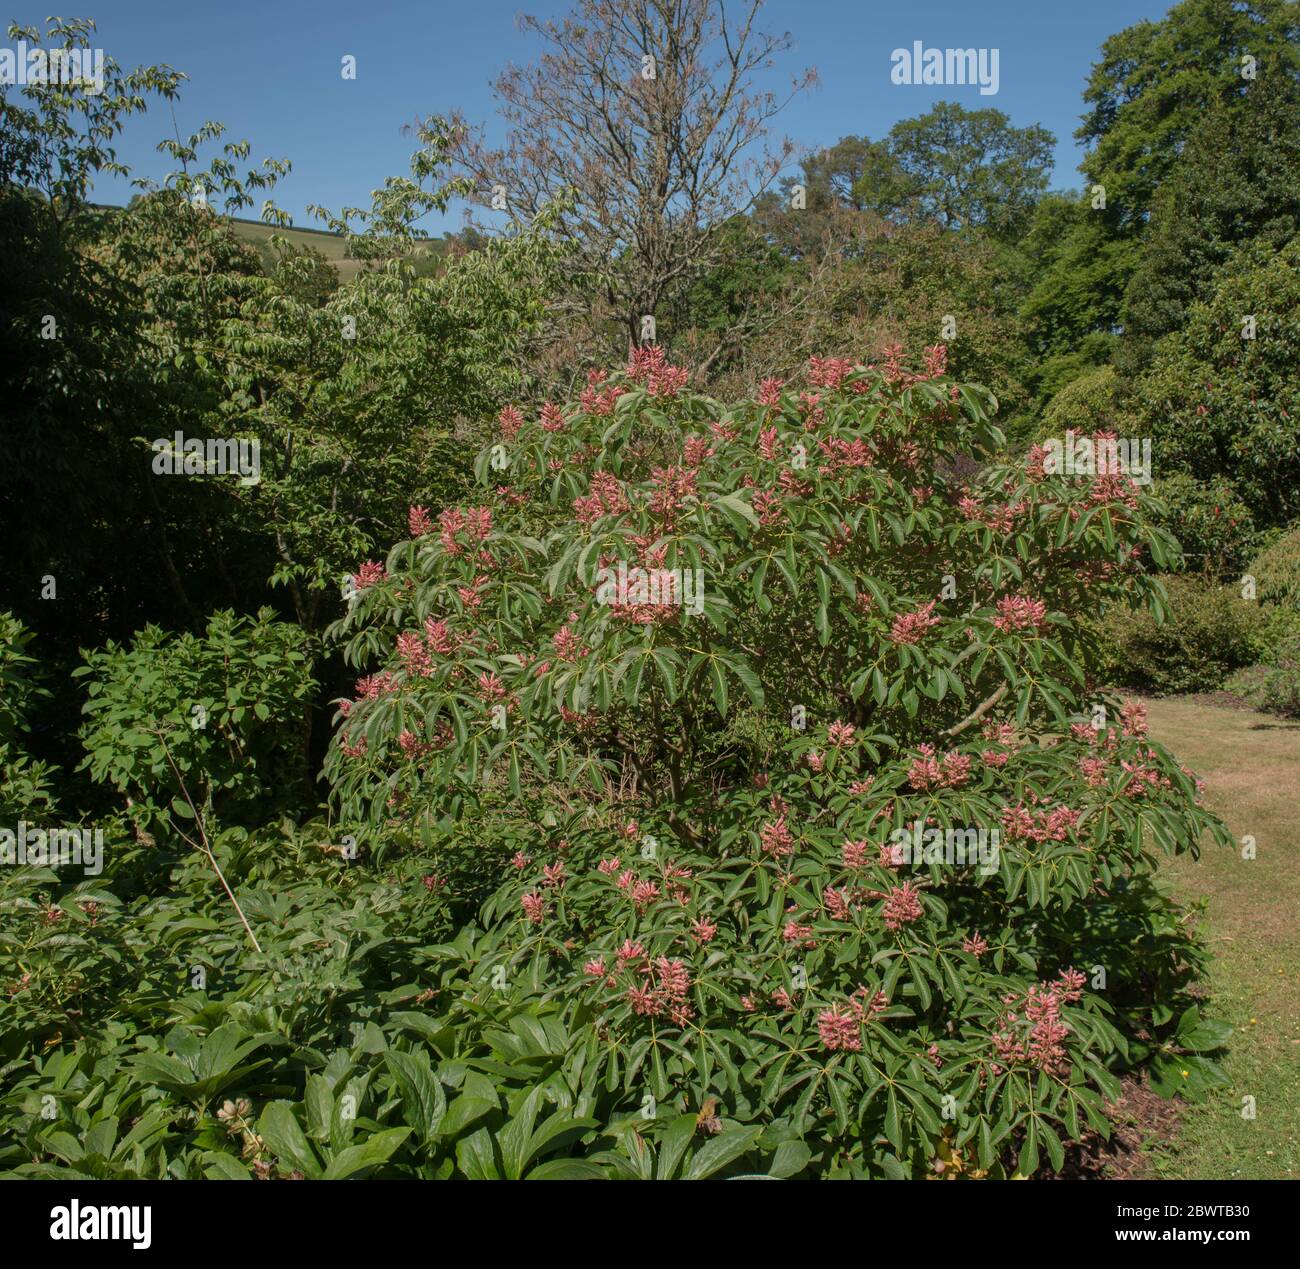 Spring Flowers of the Deciduous Red Buckeye Tree (Aesculus pavia 'Rosea nana') Growing in a Garden in Rural Devon, England, UK Stock Photo